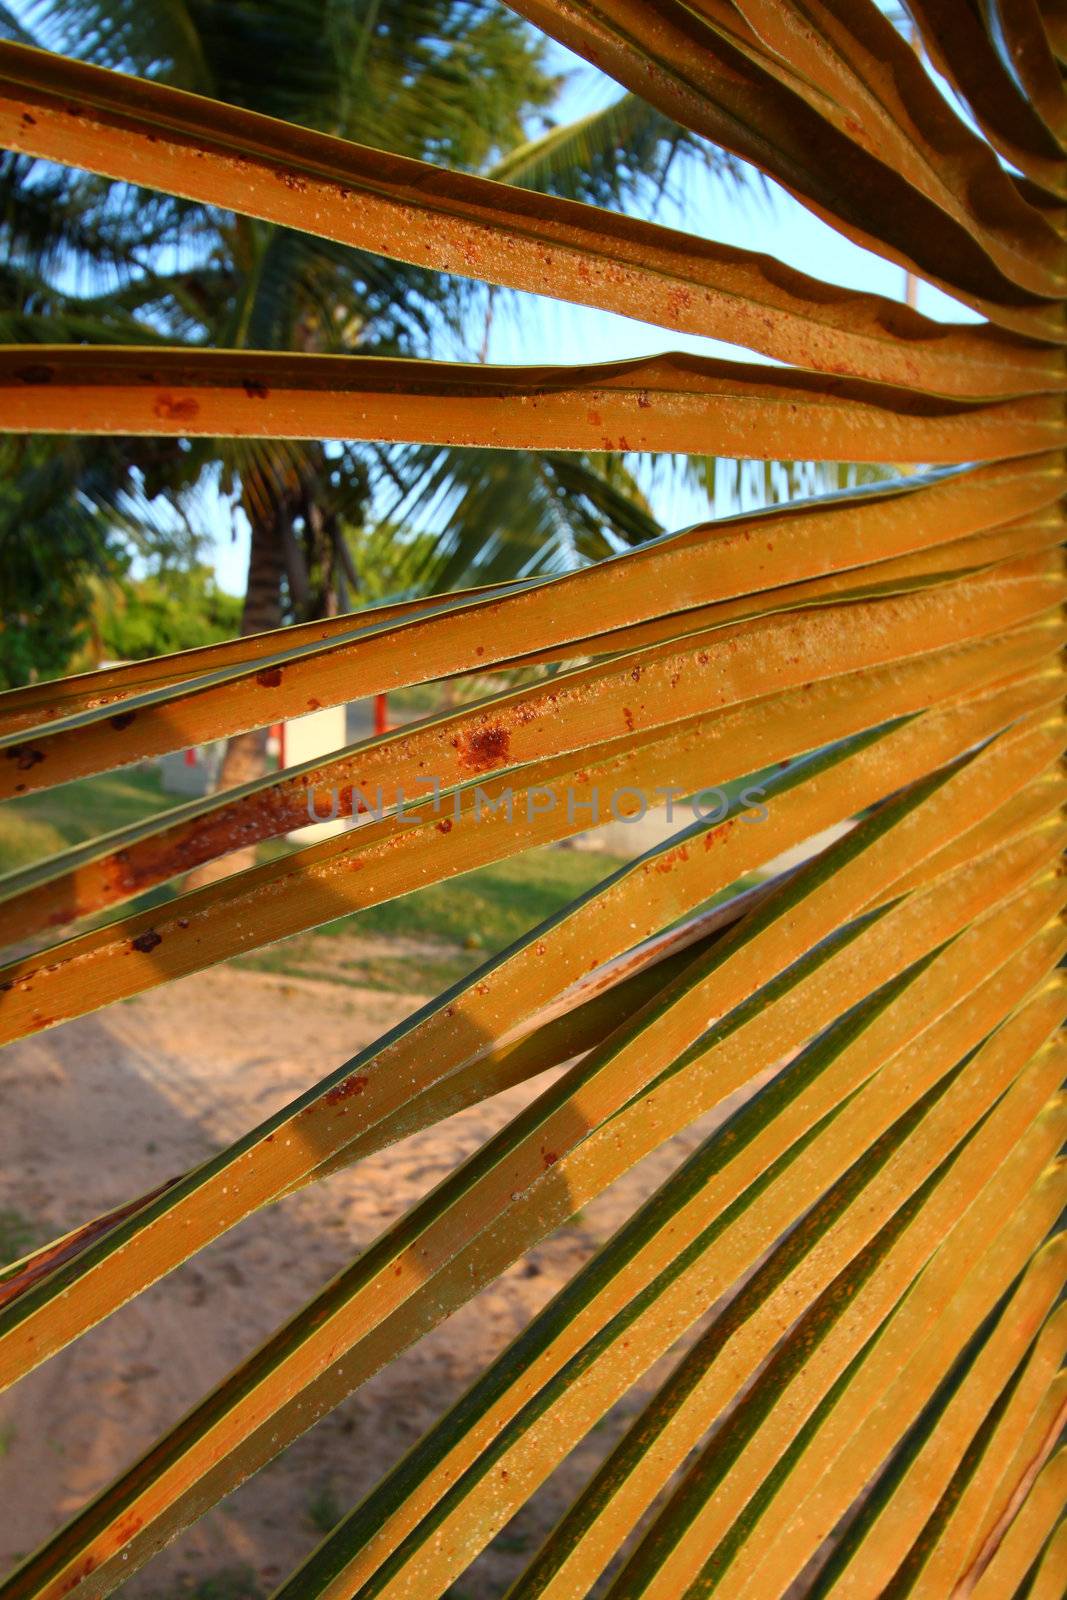 Leaflet of a palm tree at Seven Seas Beach in Puerto Rico.